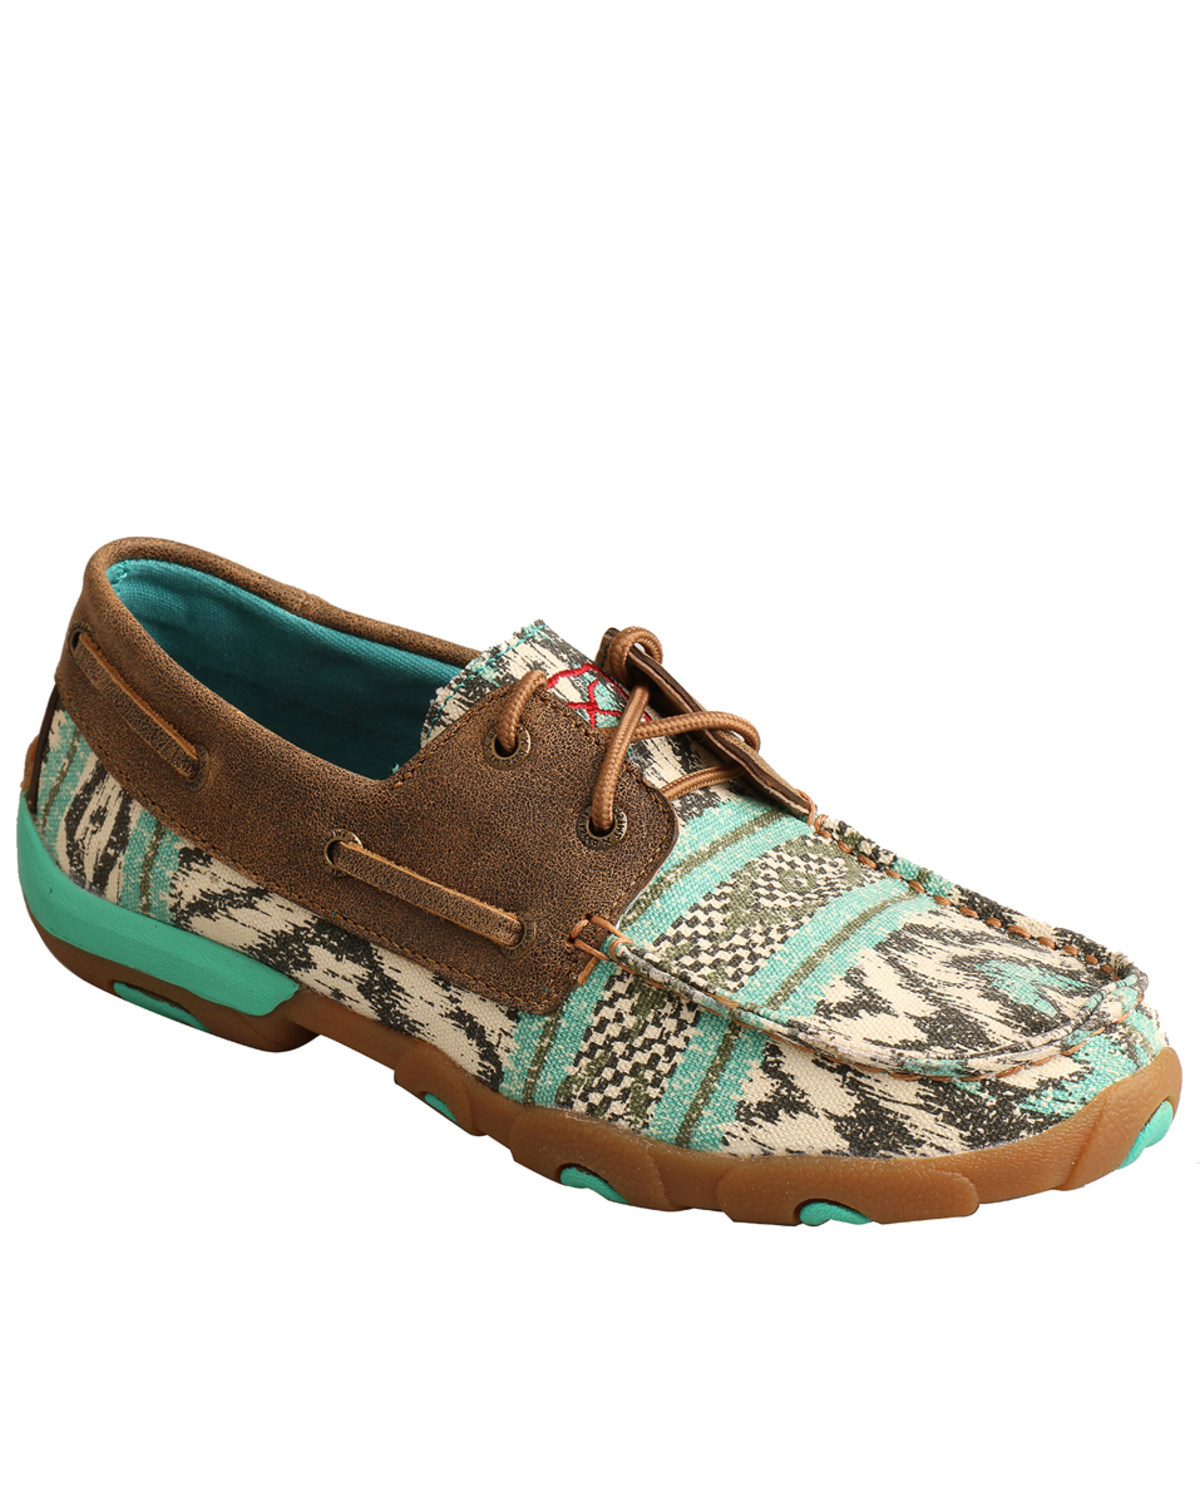 Twisted X Women's Canvas Boat Shoe Driving Mocs